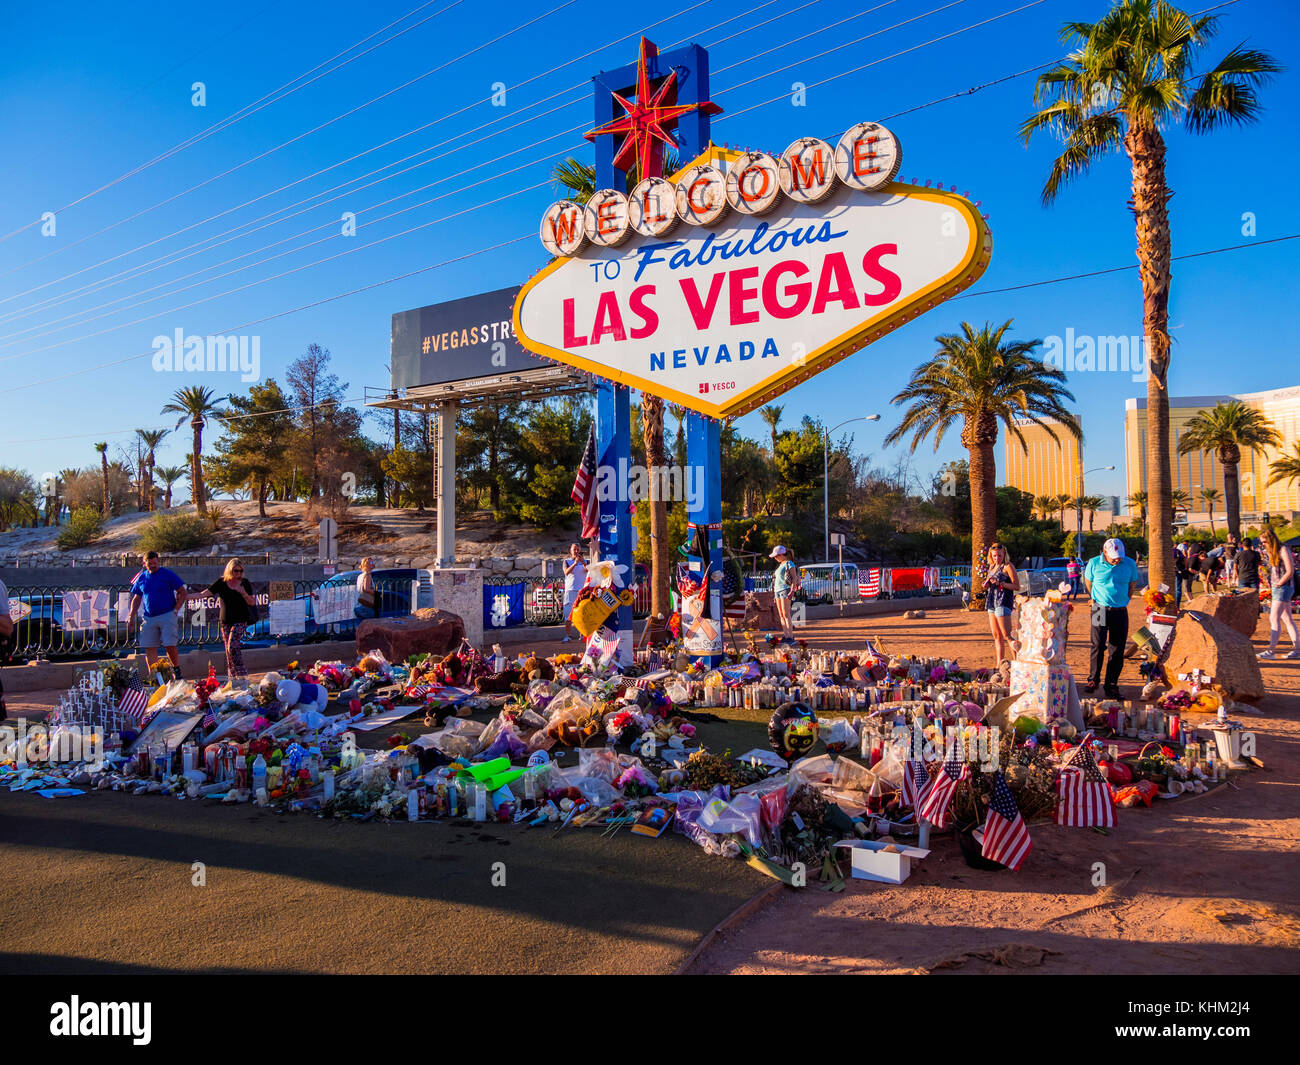 Bed of Flowers and expression of condolences after Terror Attack in Las  Vegas - LAS VEGAS / NEVADA - OCTOBER 12, 2017 Stock Photo - Alamy